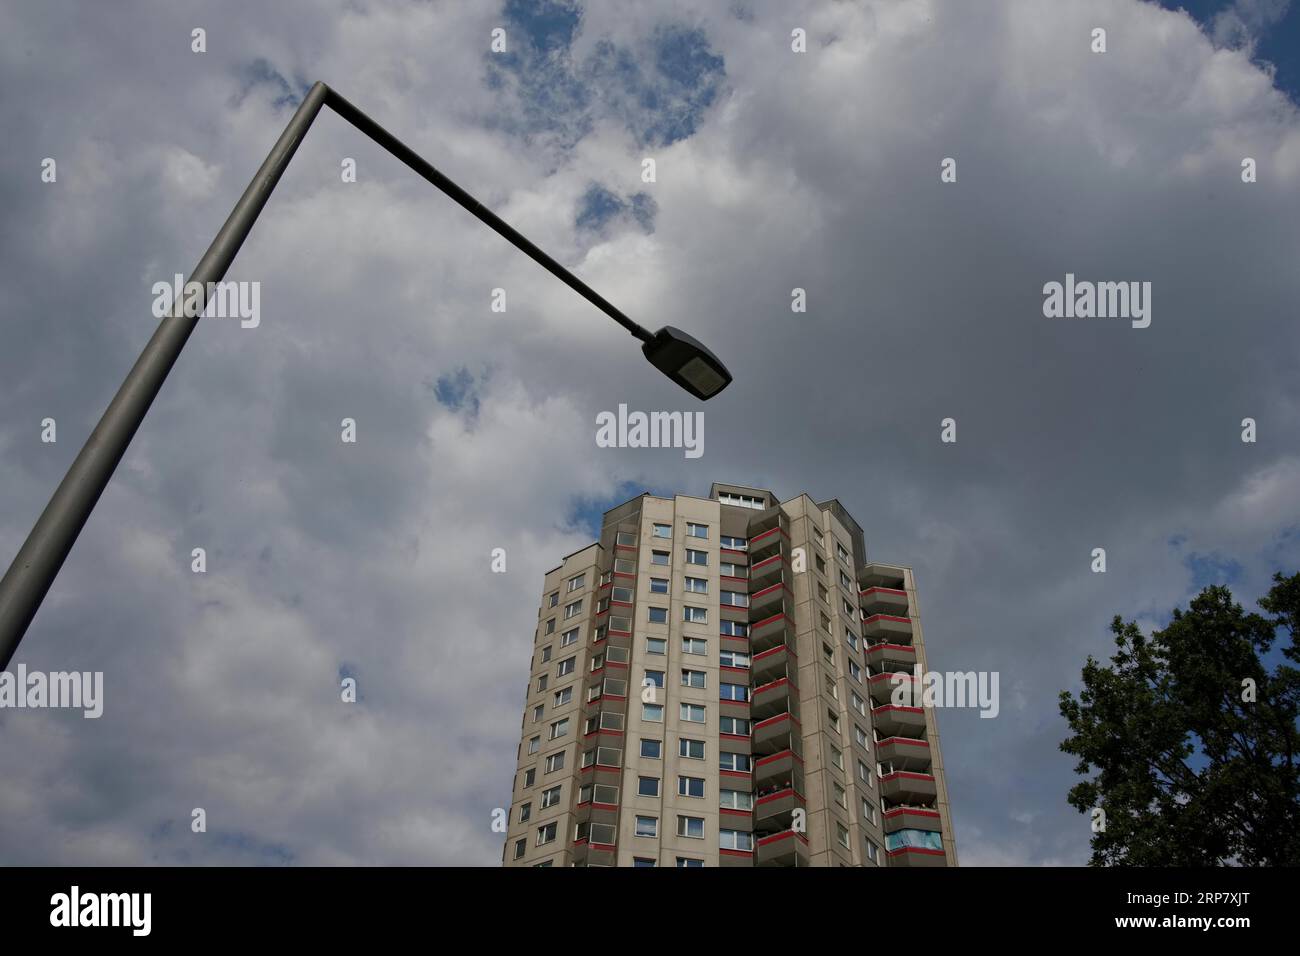 Street lamp and high-rise building in the large housing estate Gropiusstadt, Neukoelln district, Berlin, Germany Stock Photo